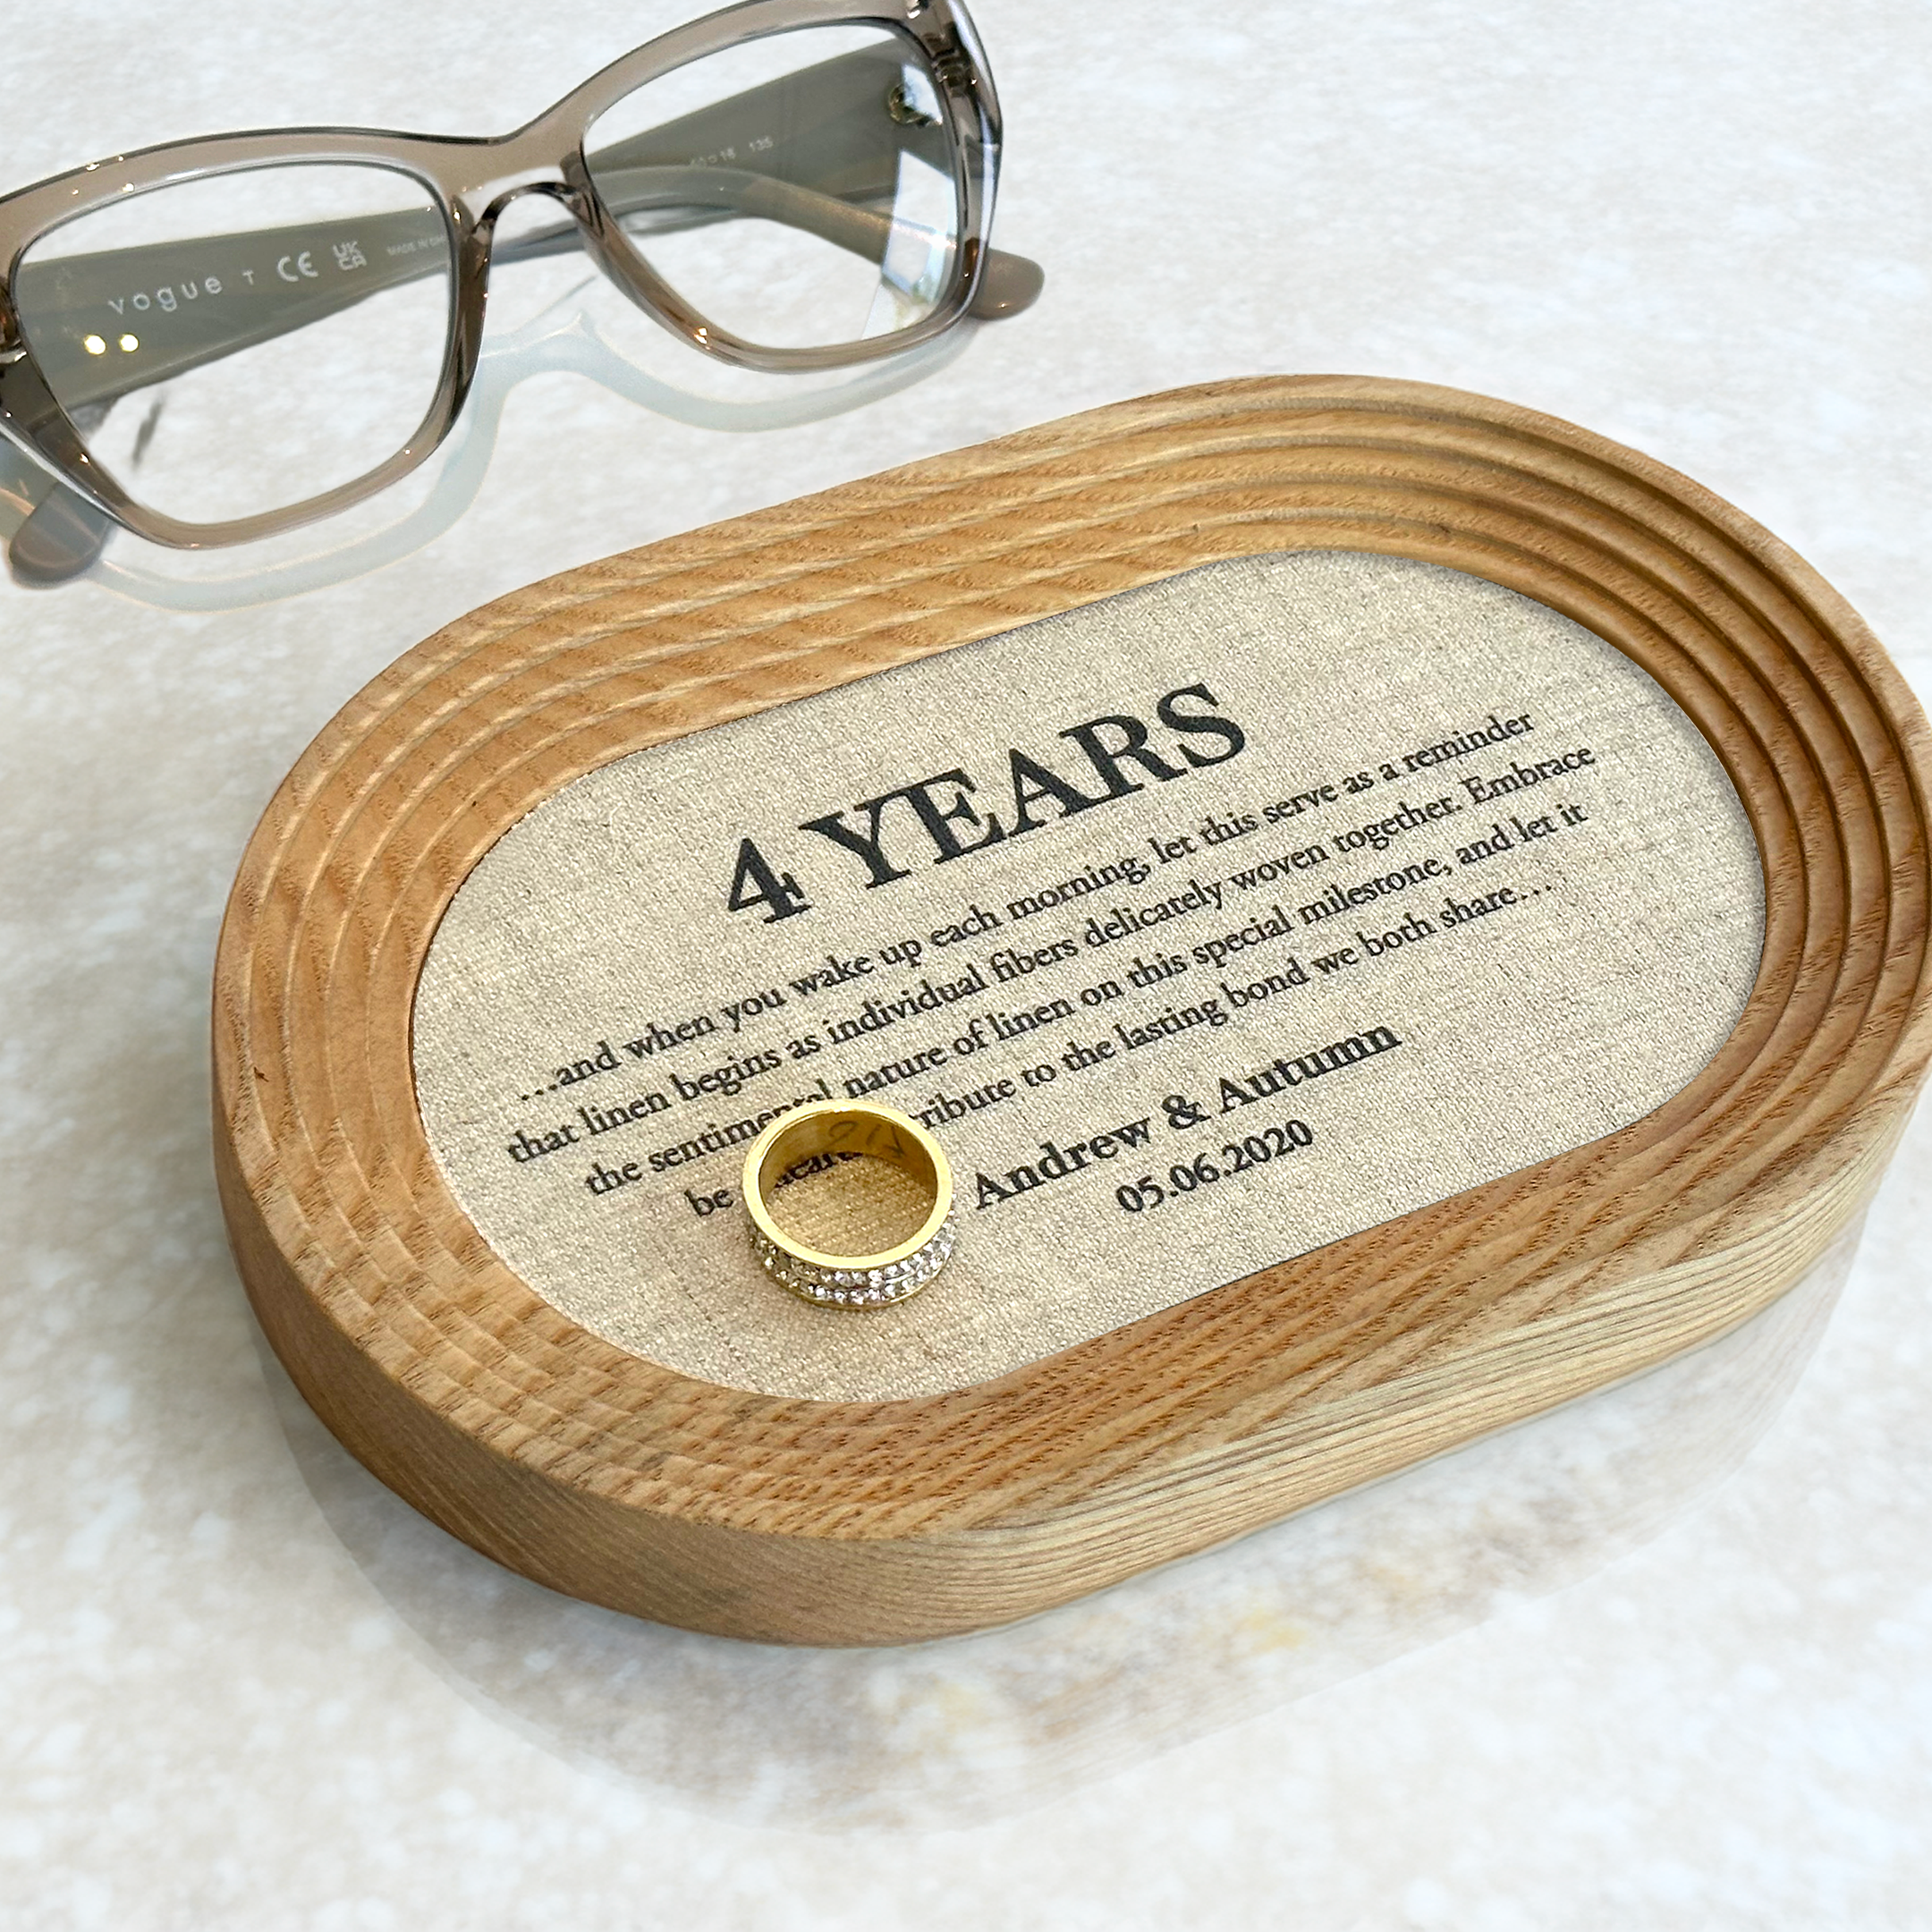 Customizable tray for 4th linen anniversary celebration - Use as key tray, ring dish or jewelry tray